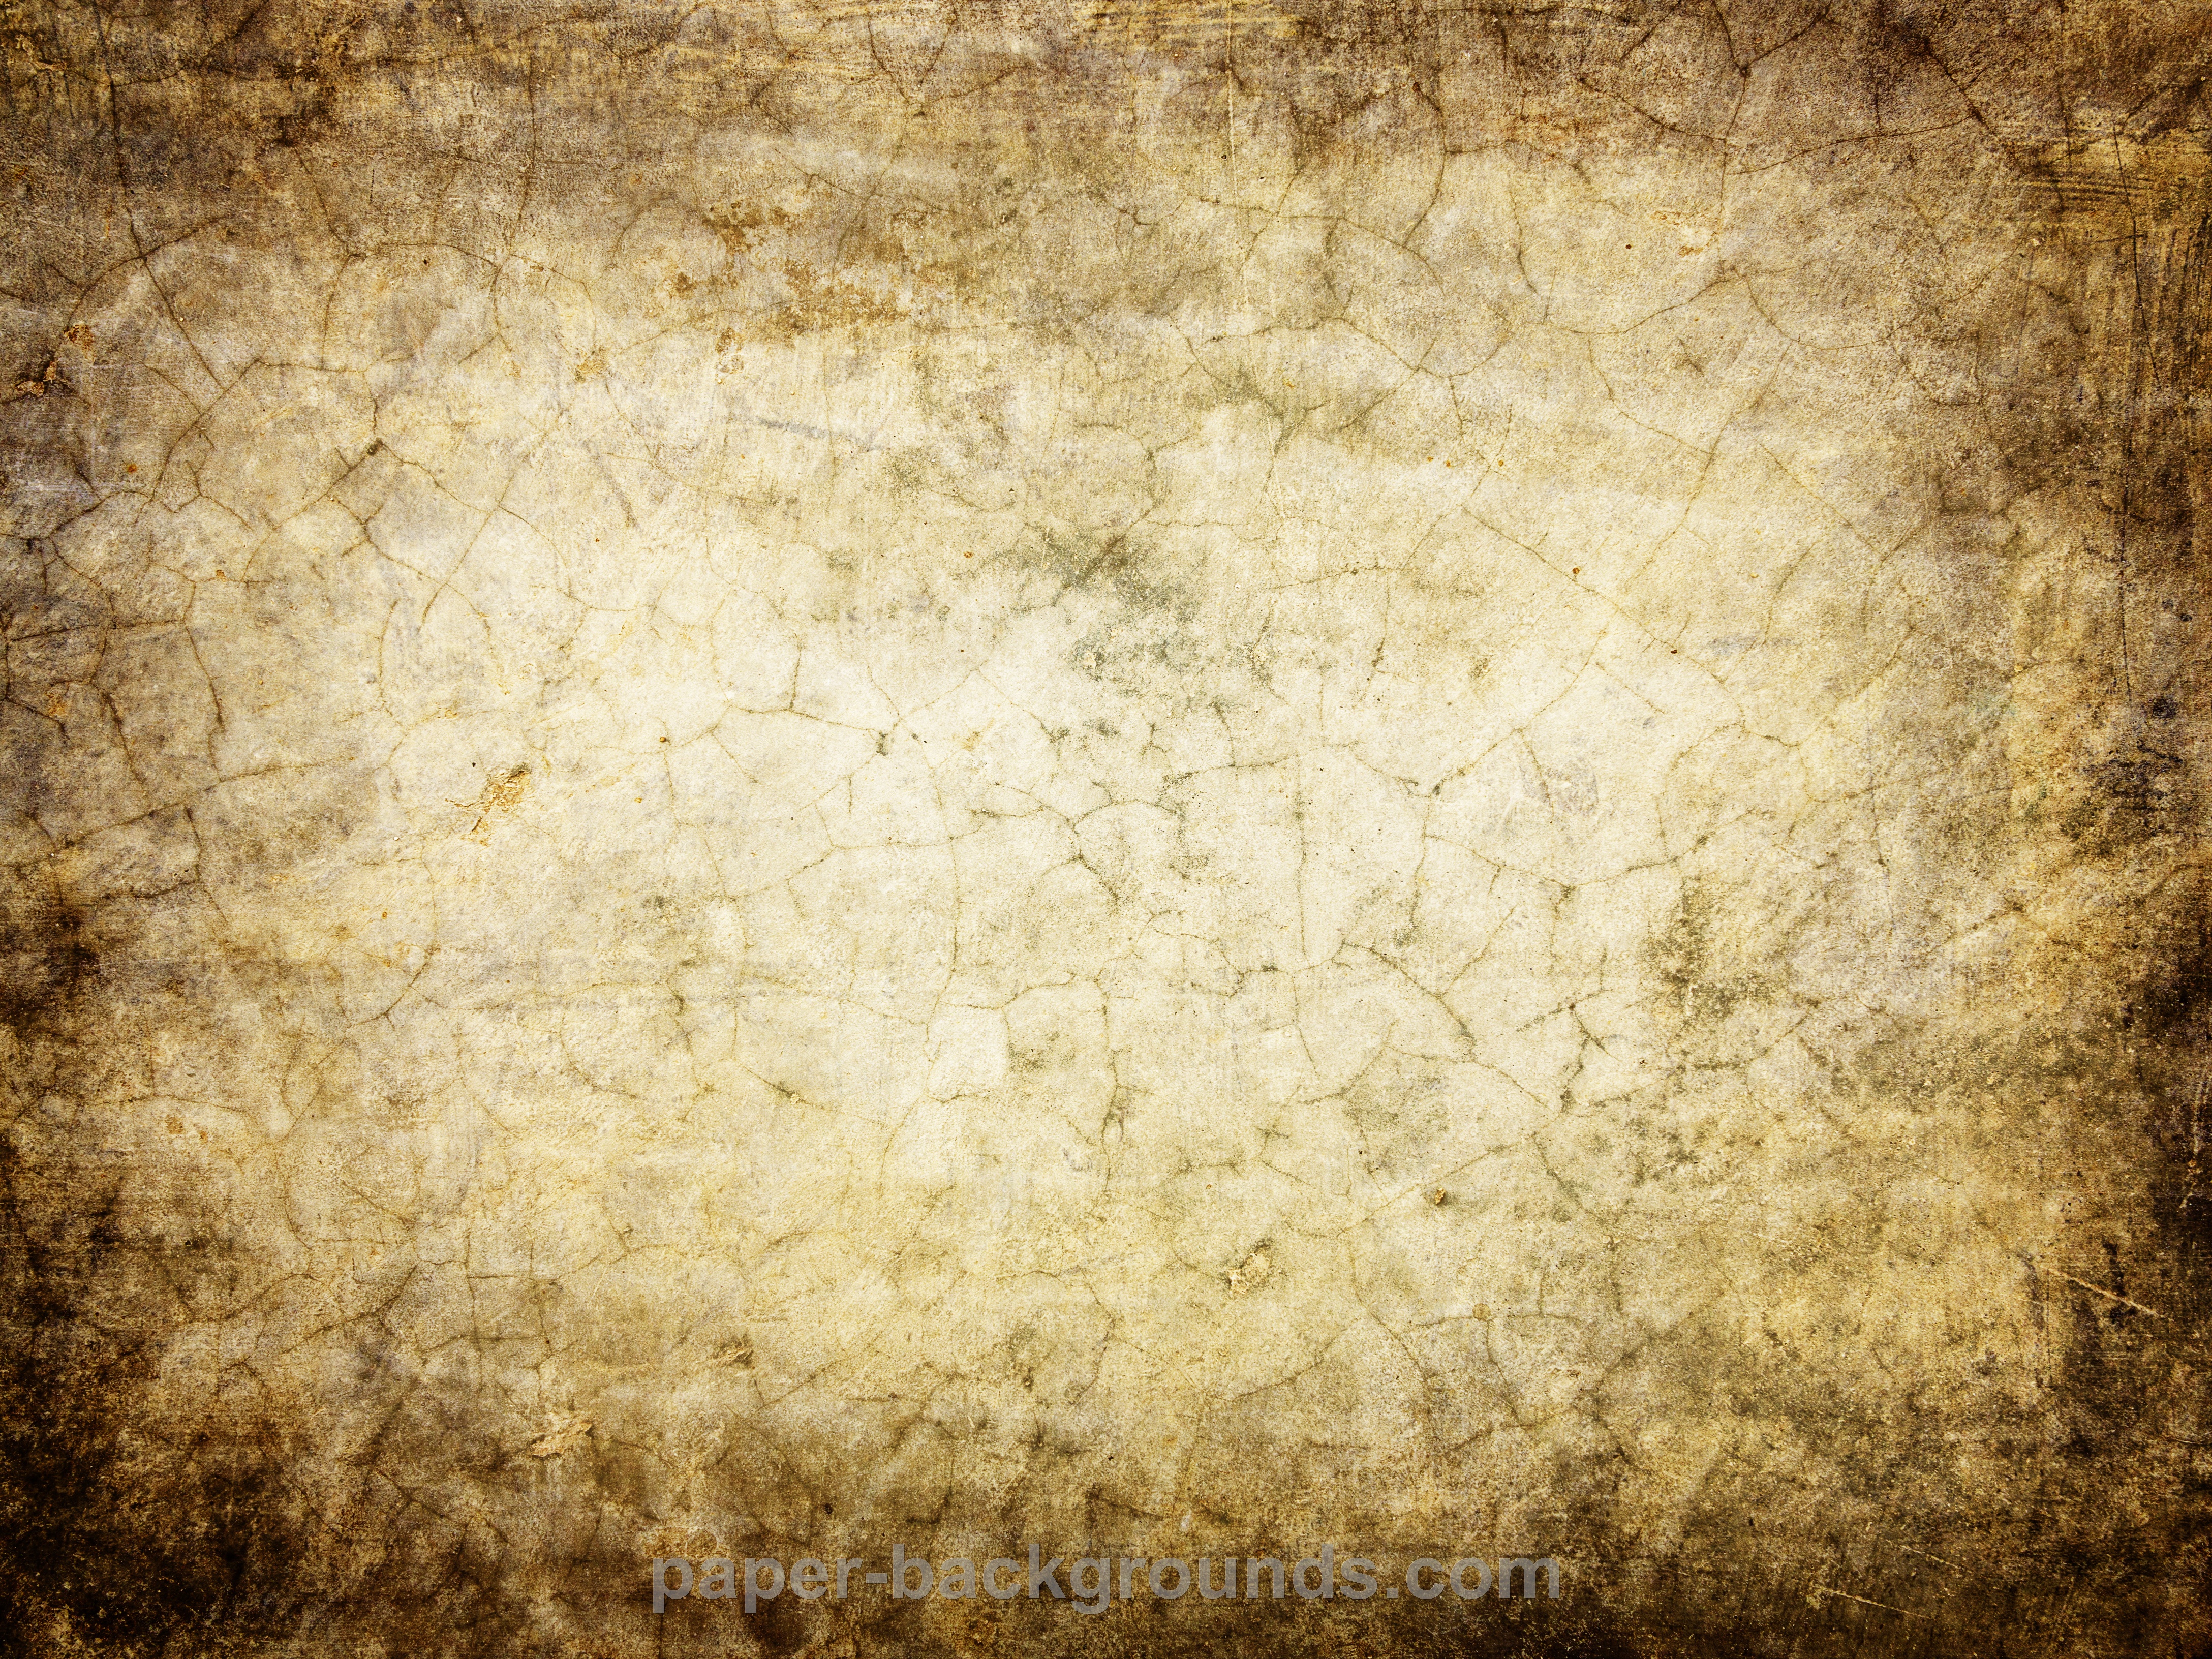 Paper Backgrounds | brown-grunge-background